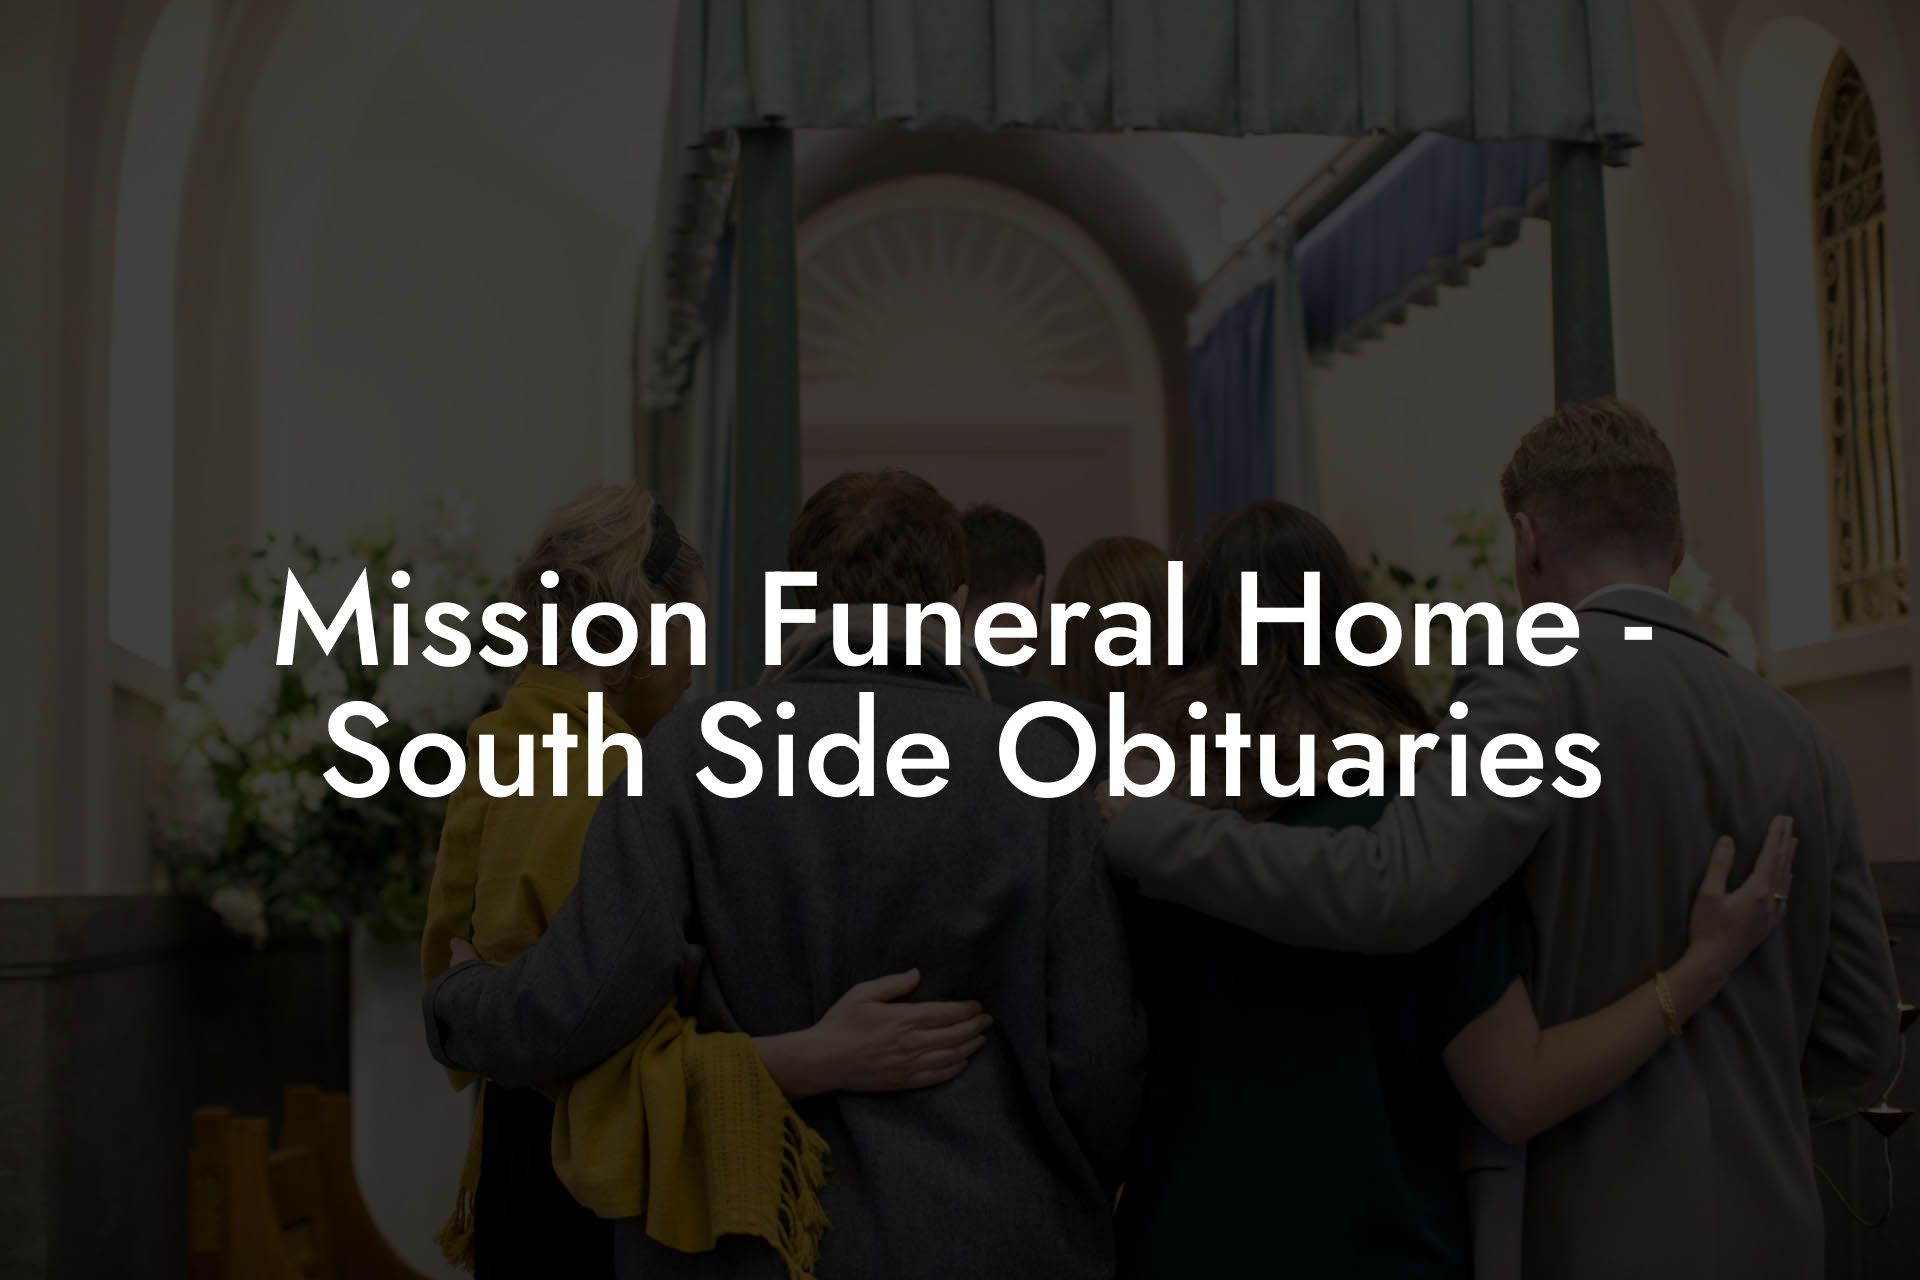 Mission Funeral Home - South Side Obituaries